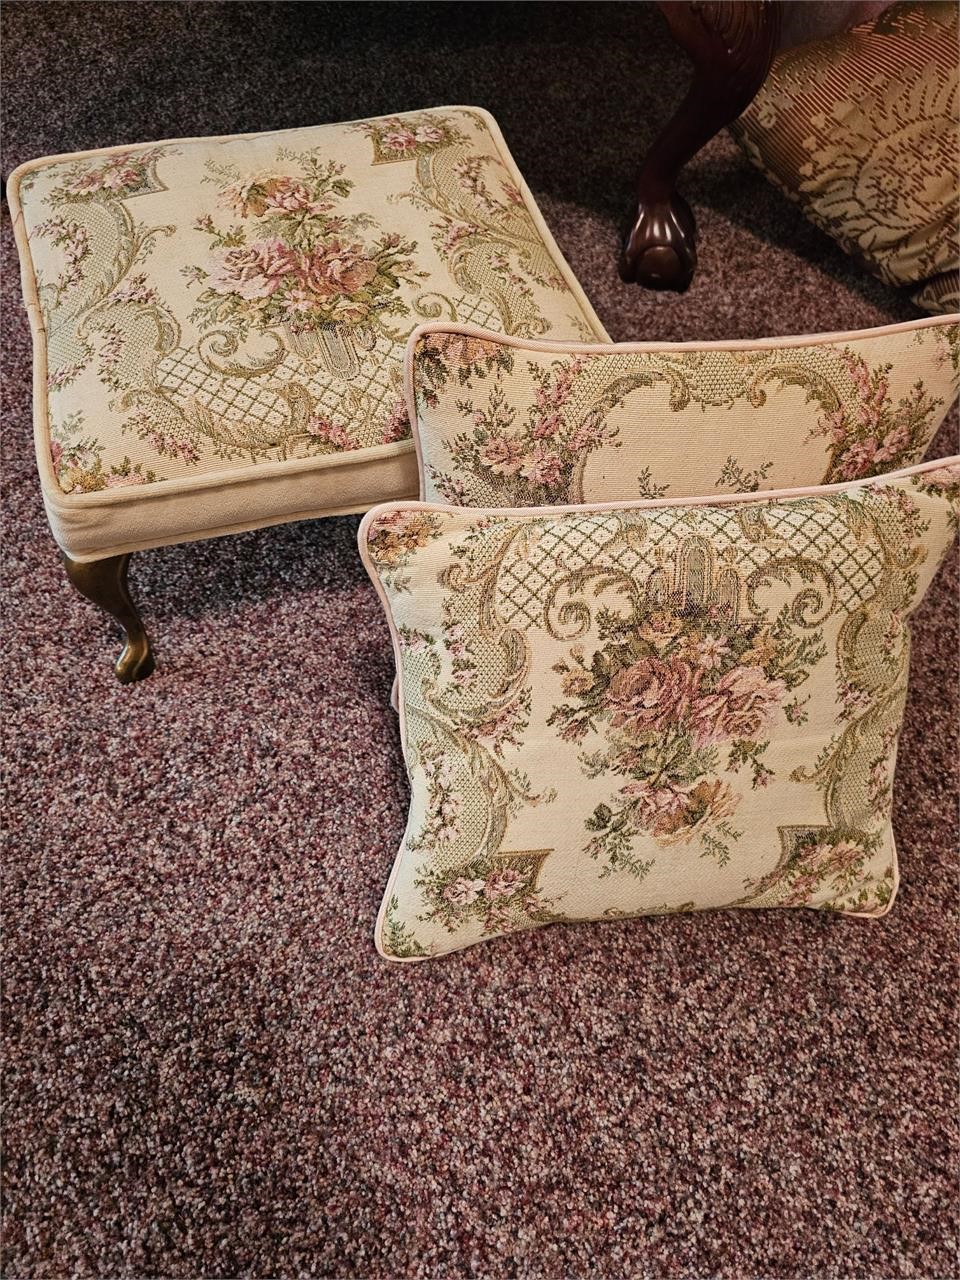 Vintage small Footstool w/accessory throw pillows